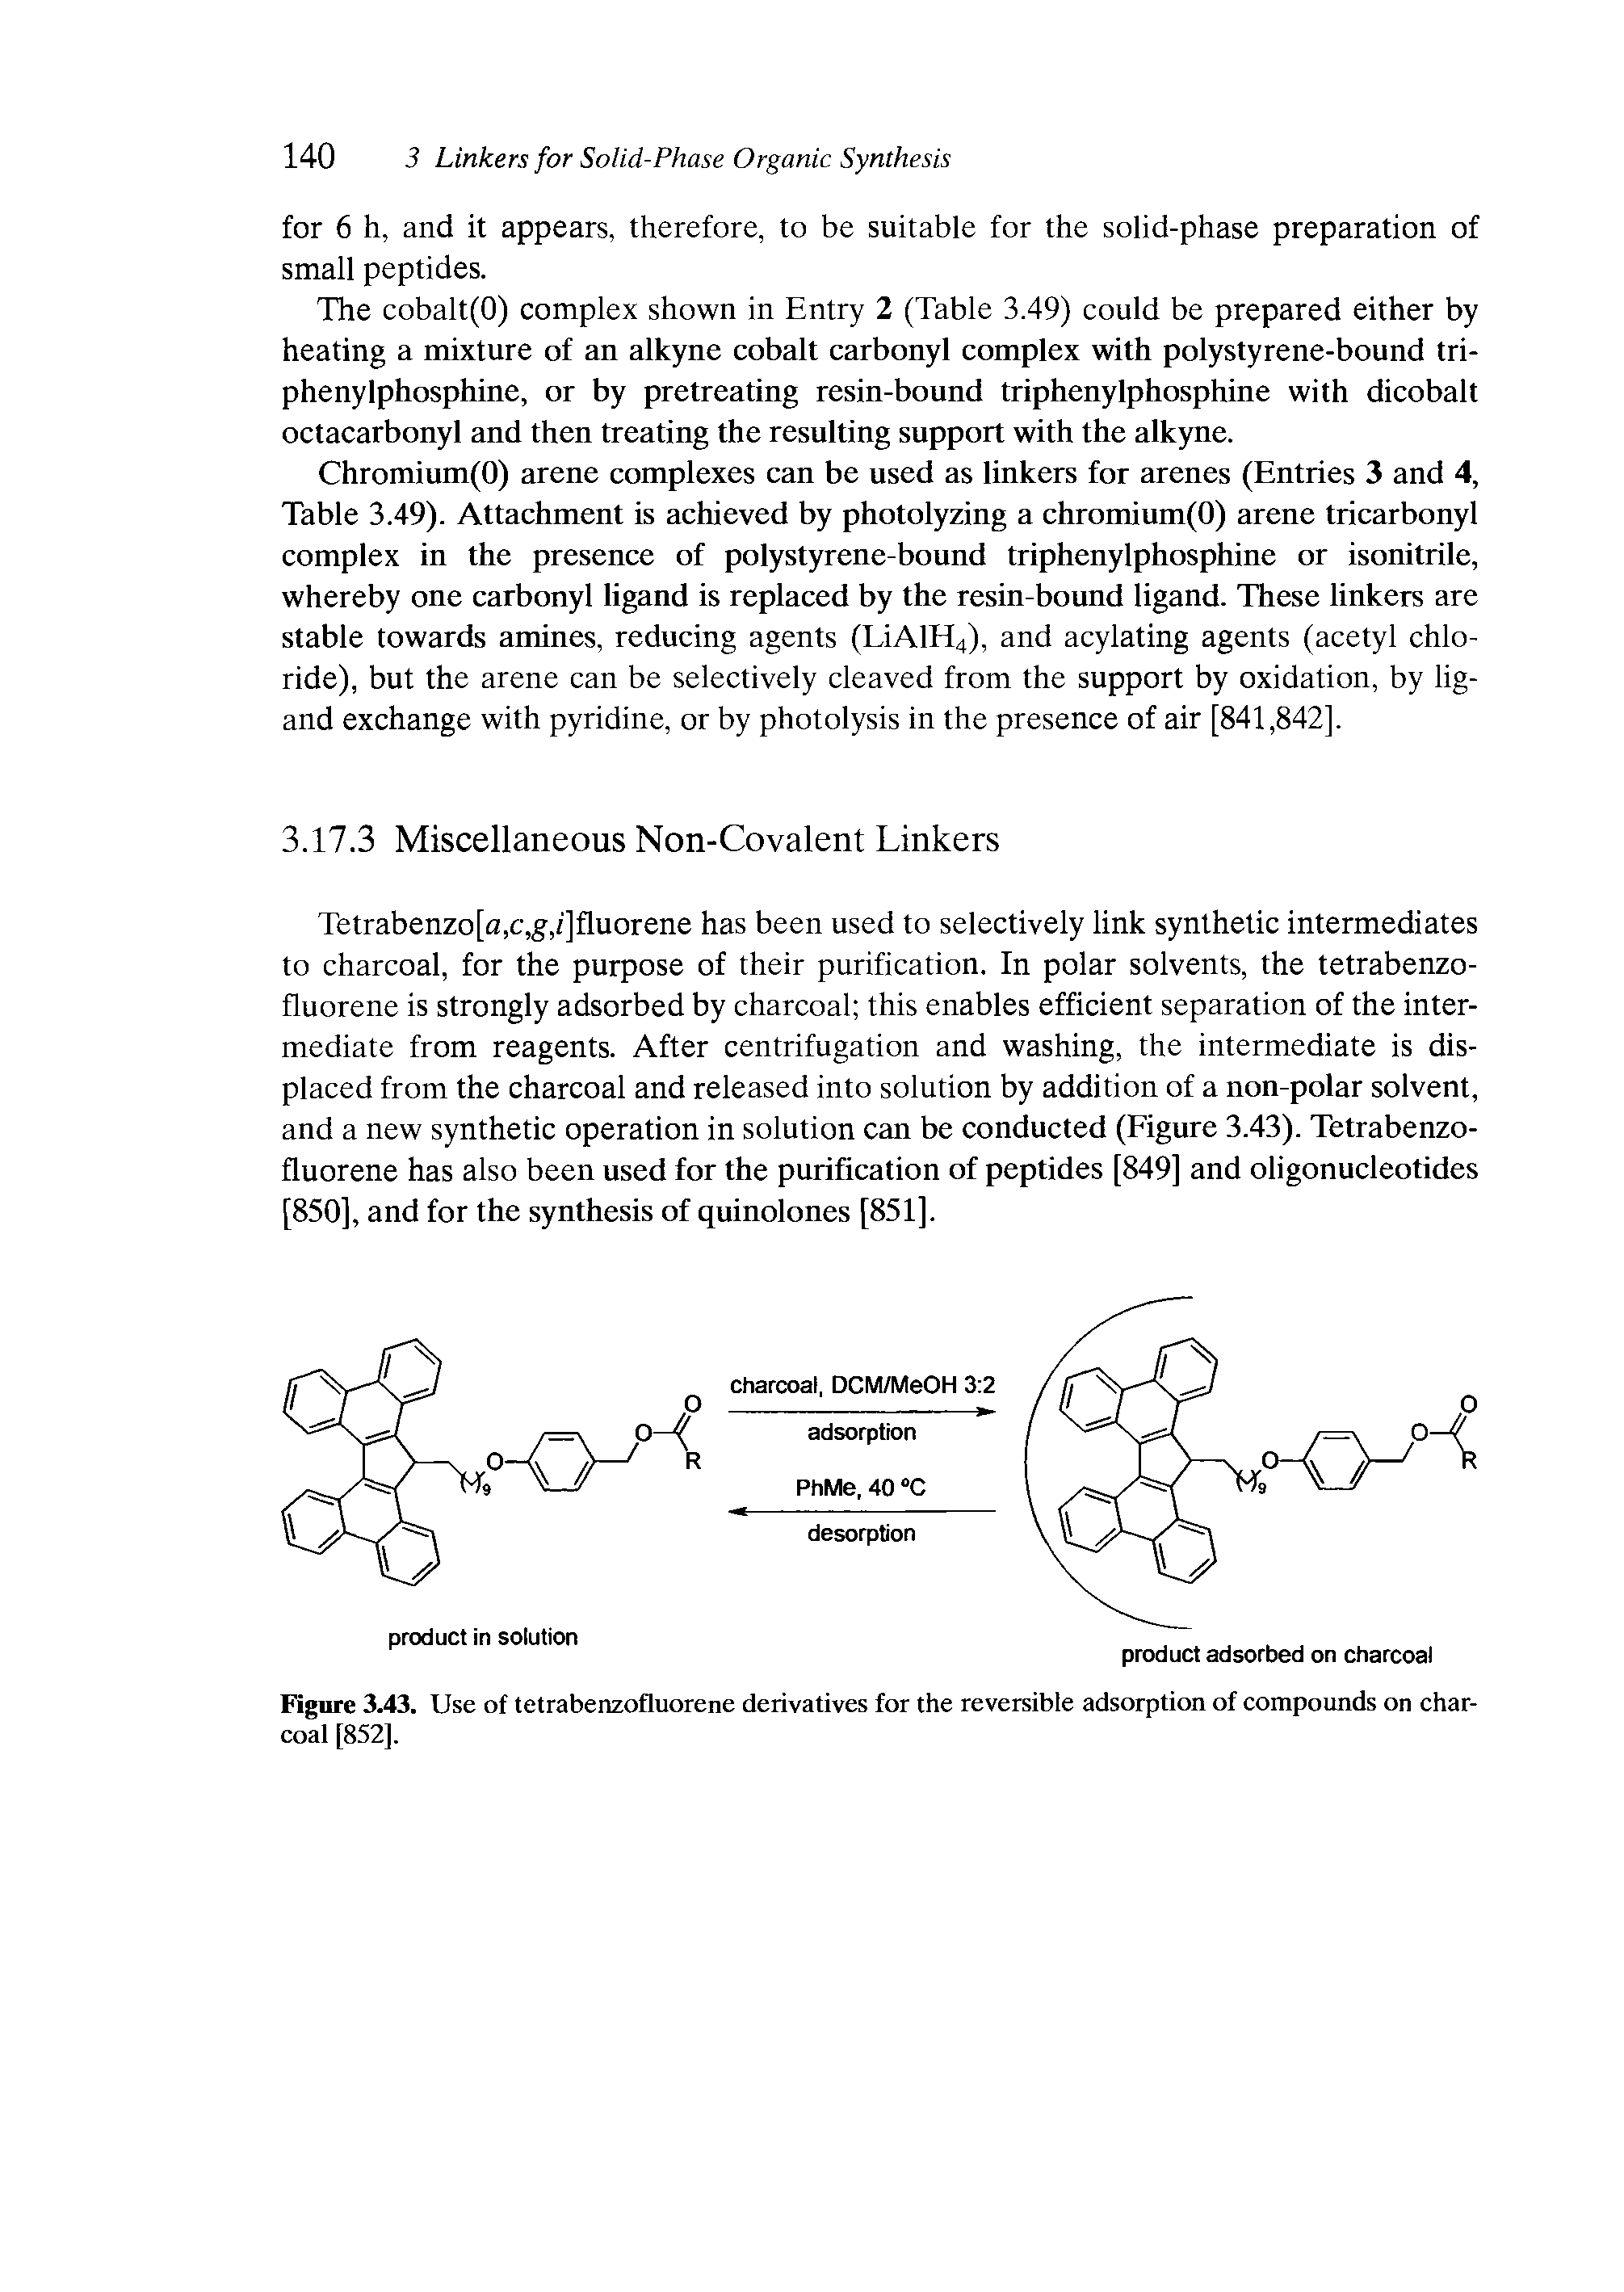 Figure 3.43. Use of tetrabenzofluorene derivatives for the reversible adsorption of compounds on charcoal [852],...